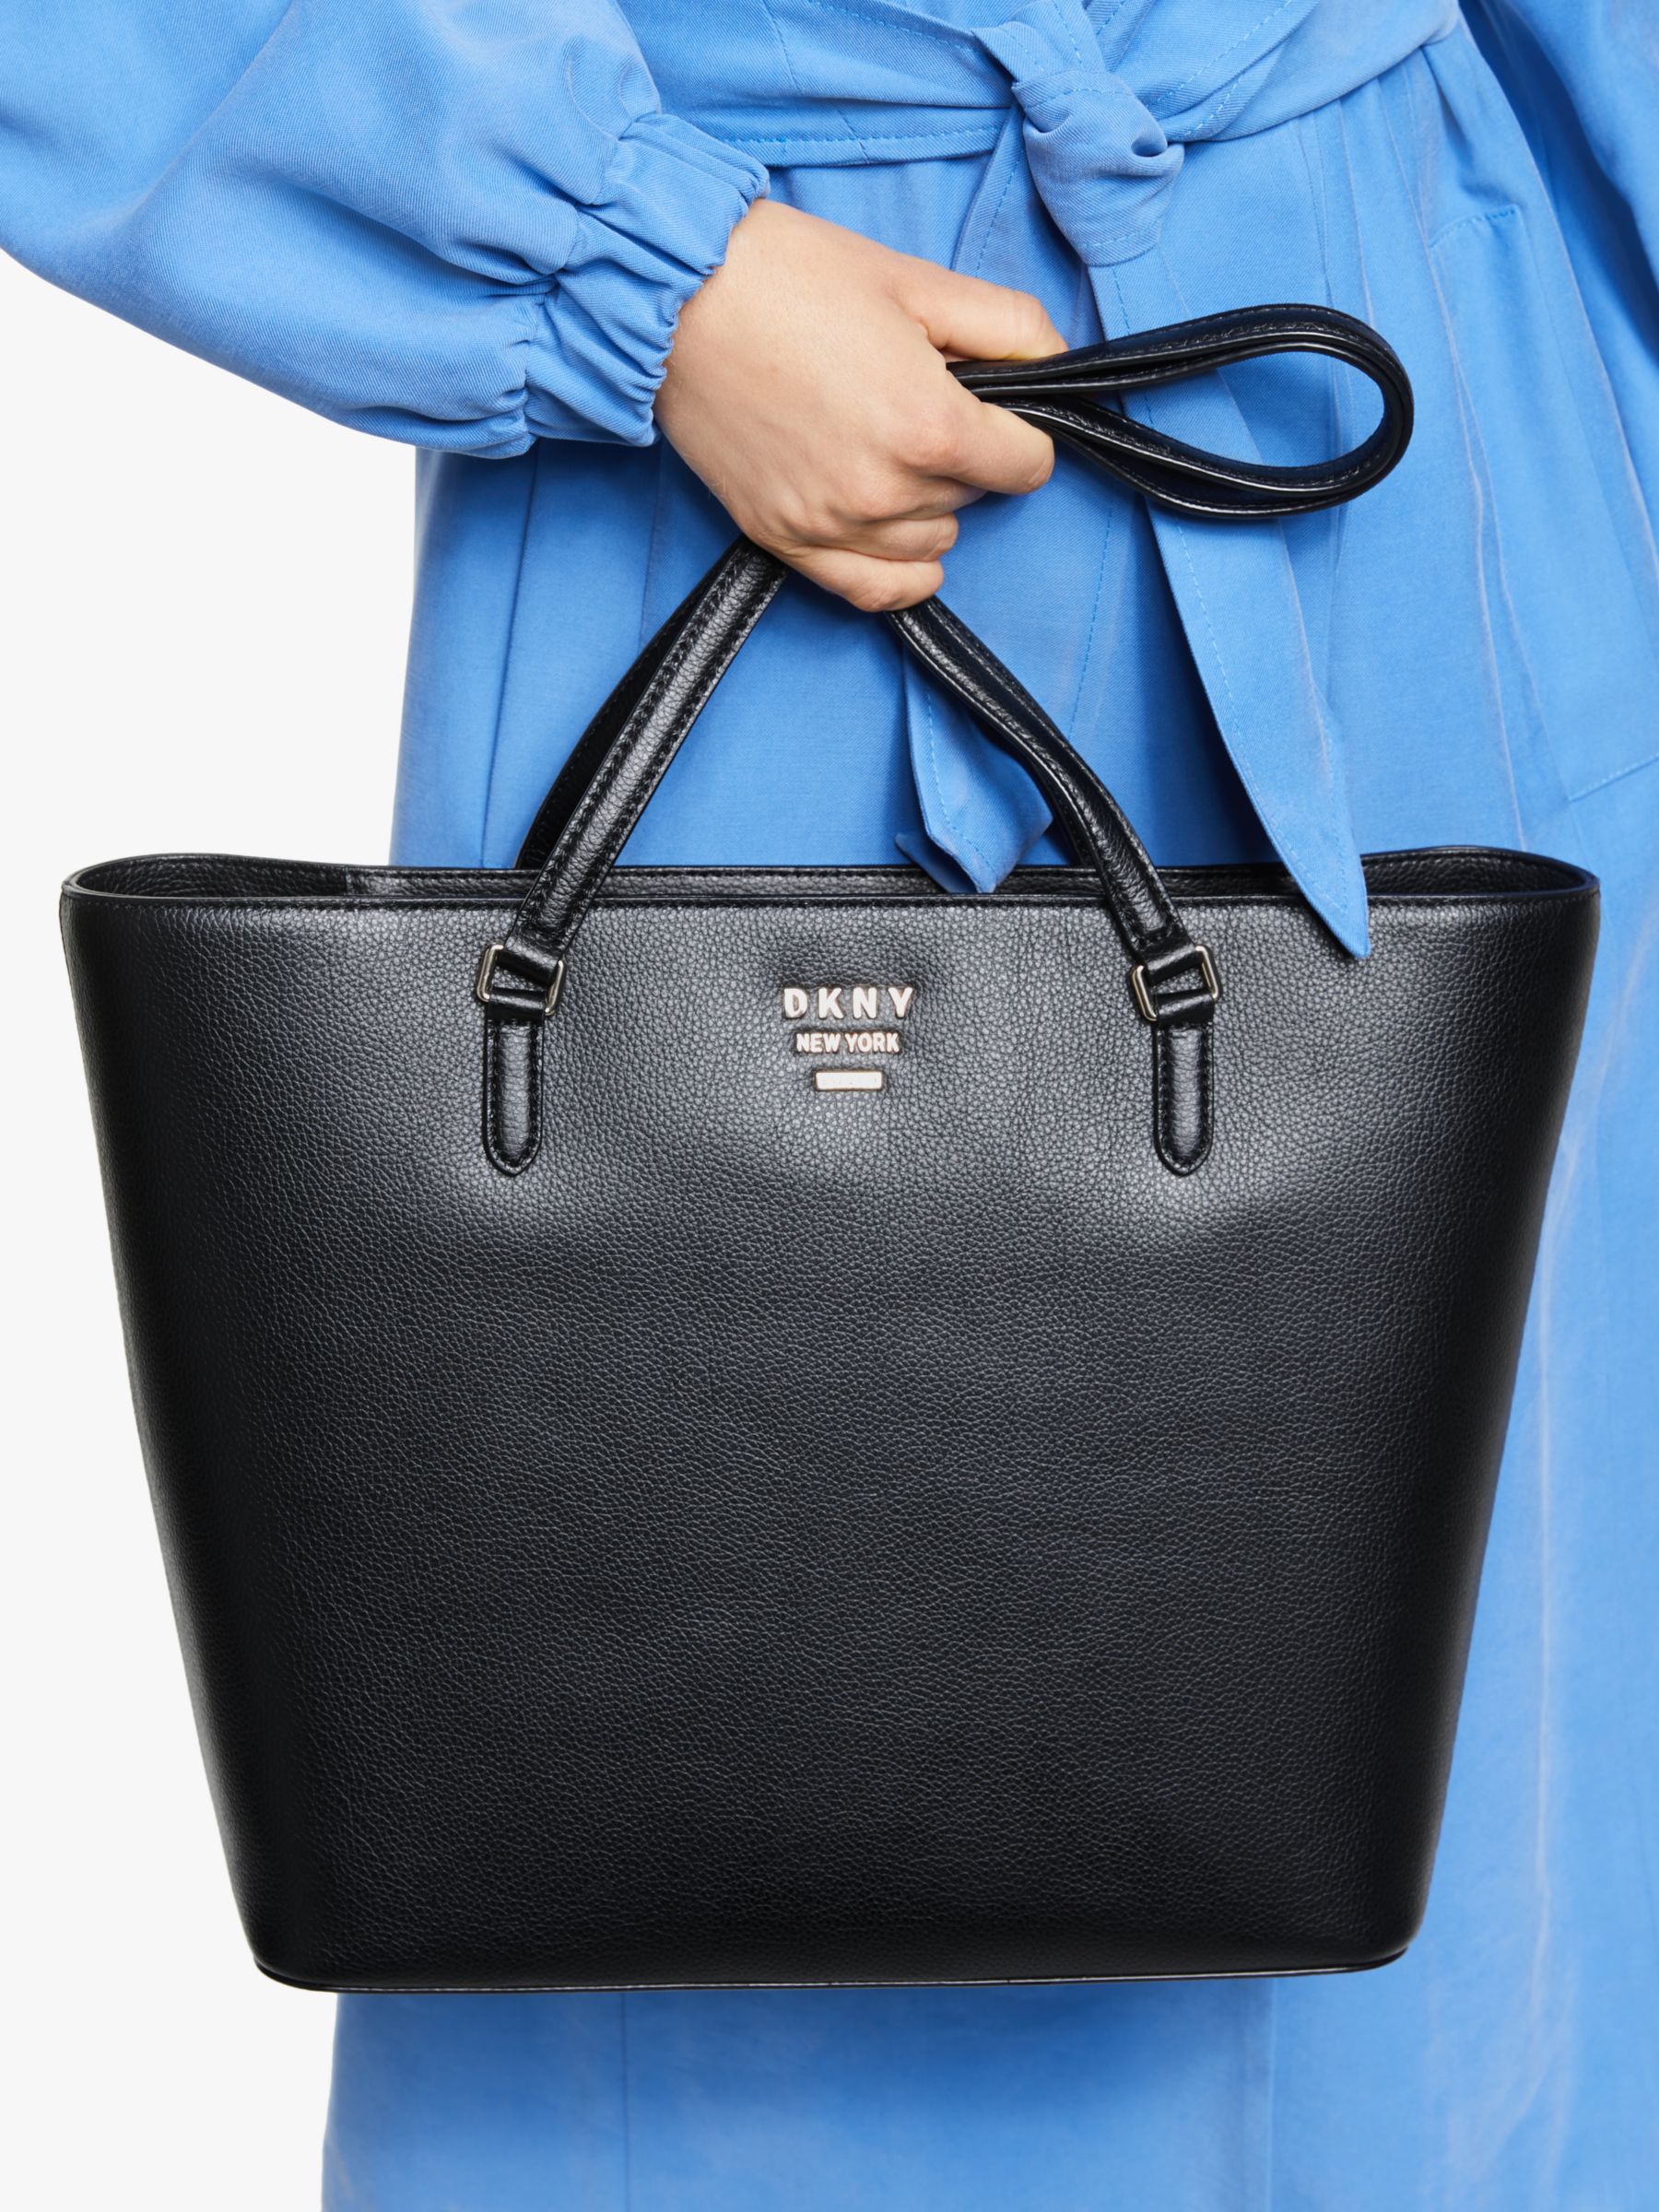 DKNY Whitney Large Leather Tote Bag at 